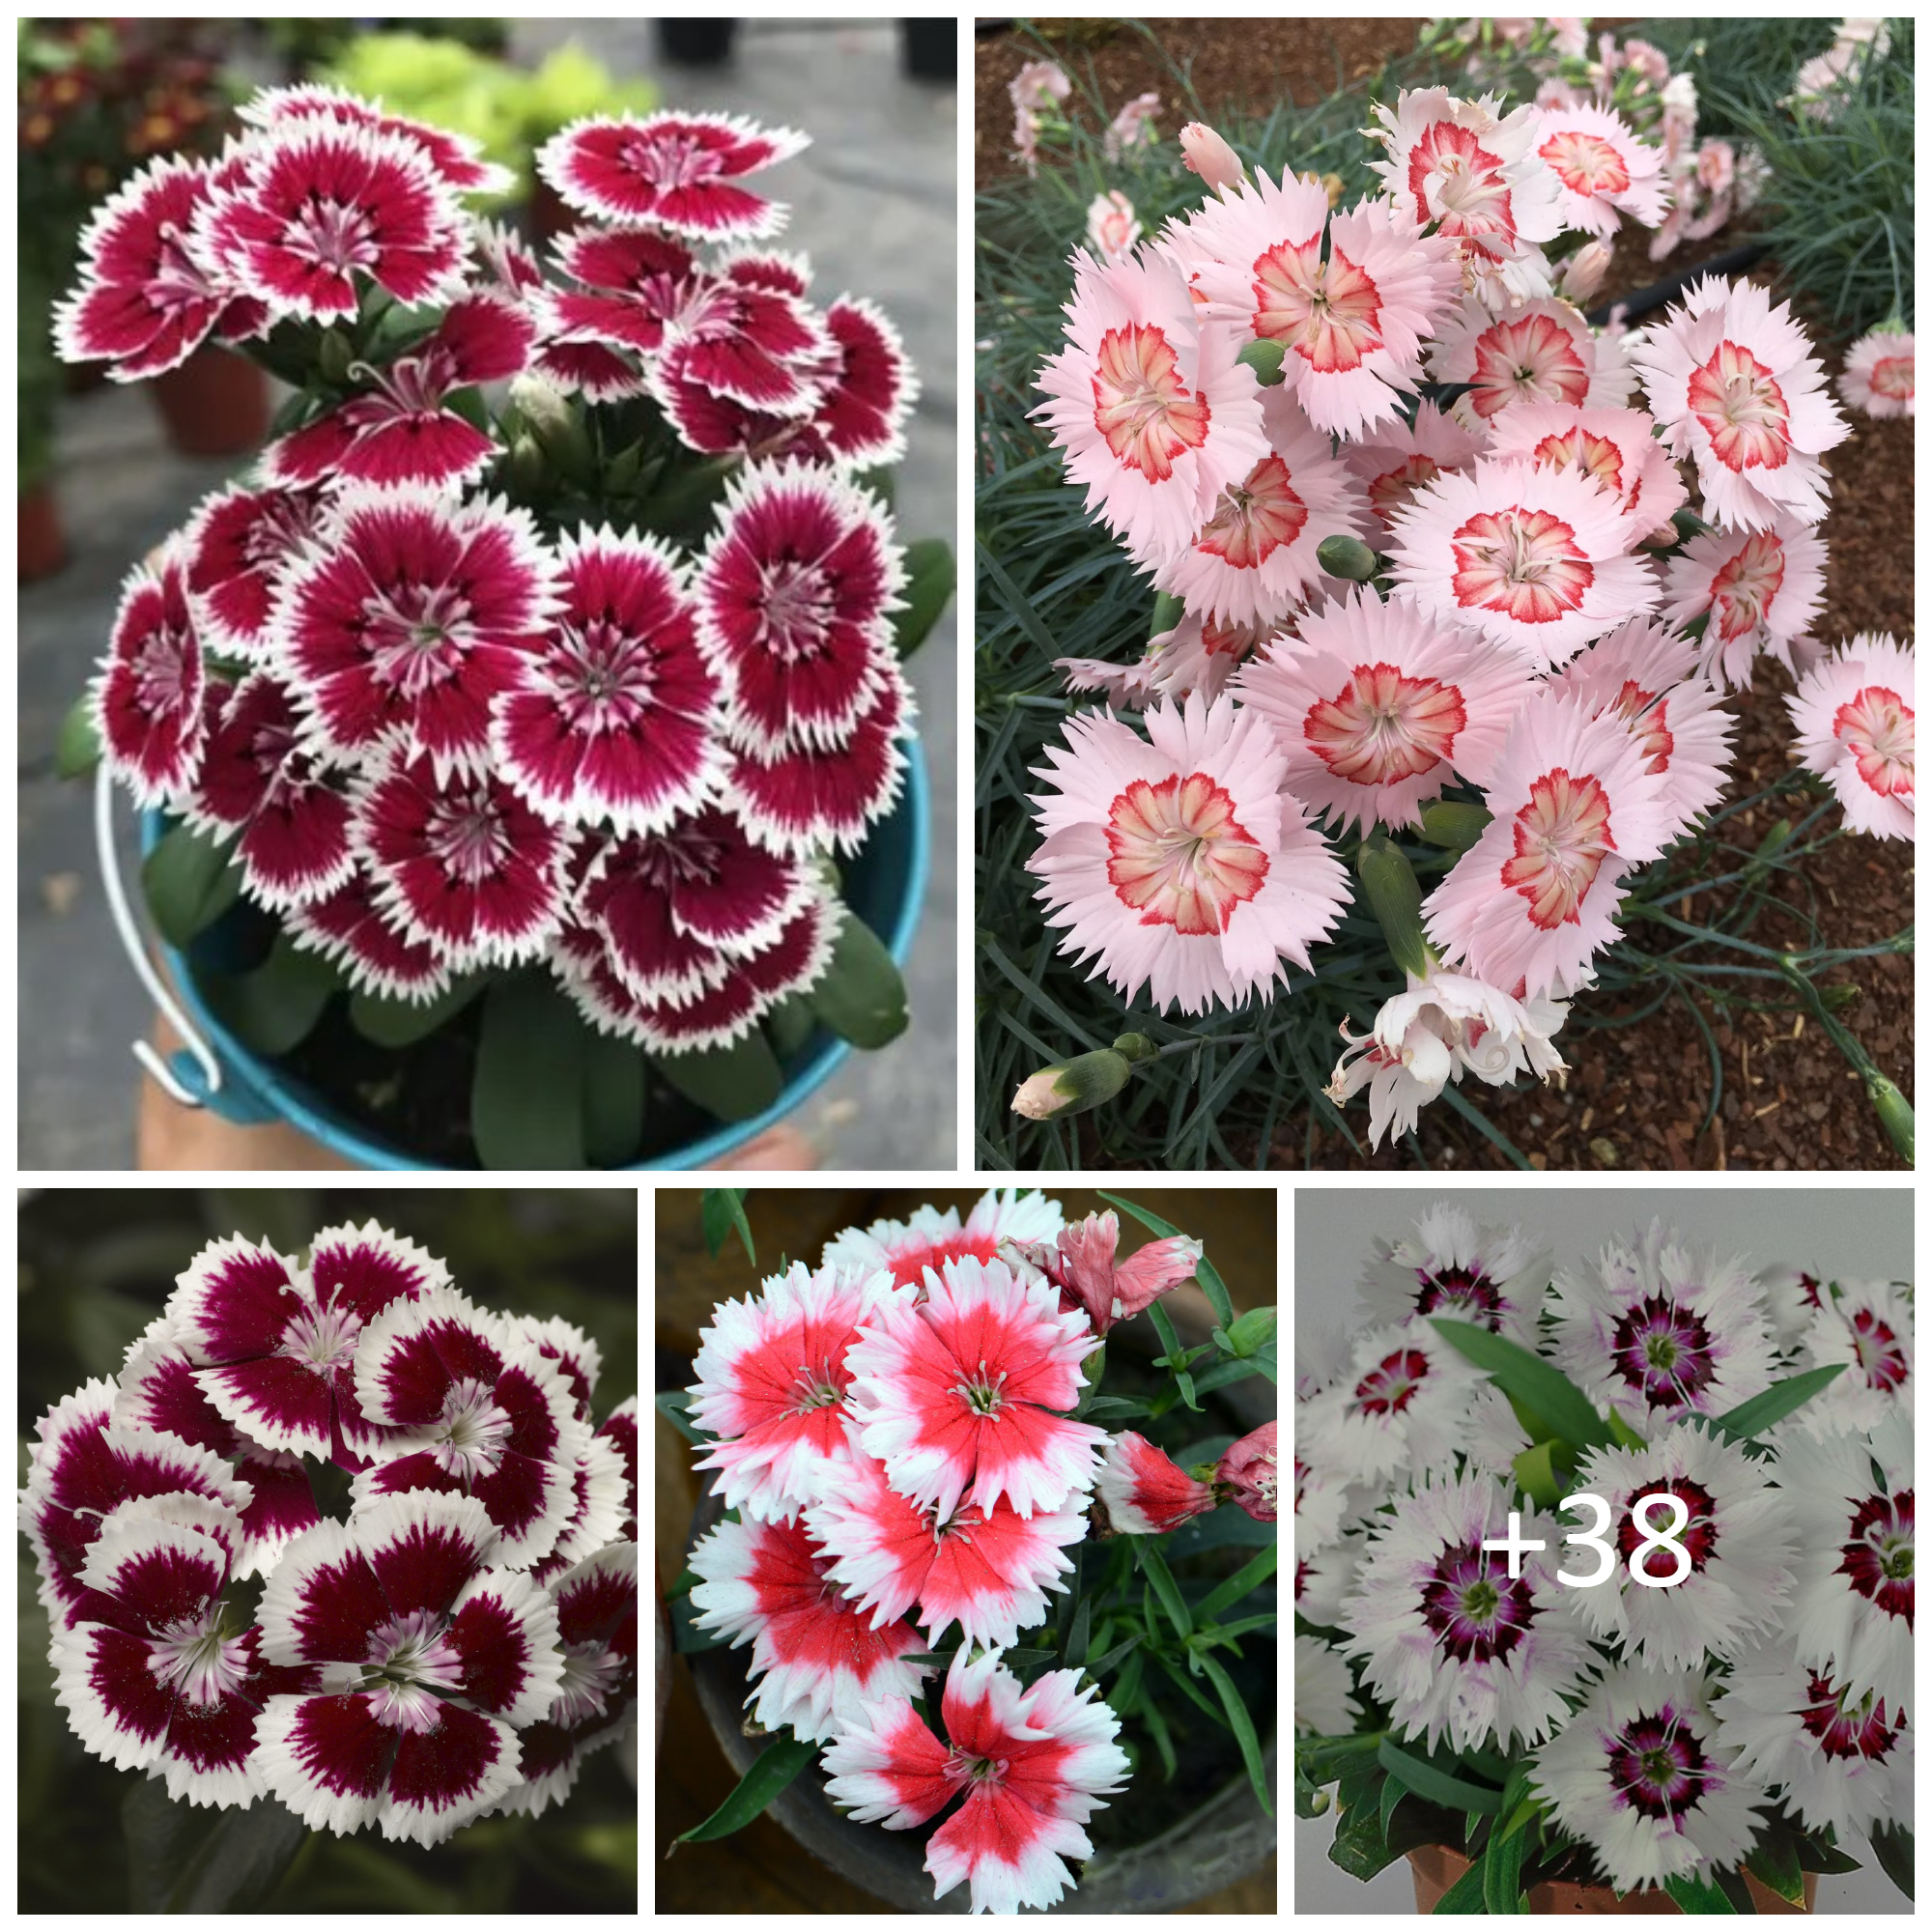 How to Grow and Care for Dianthus Flowers